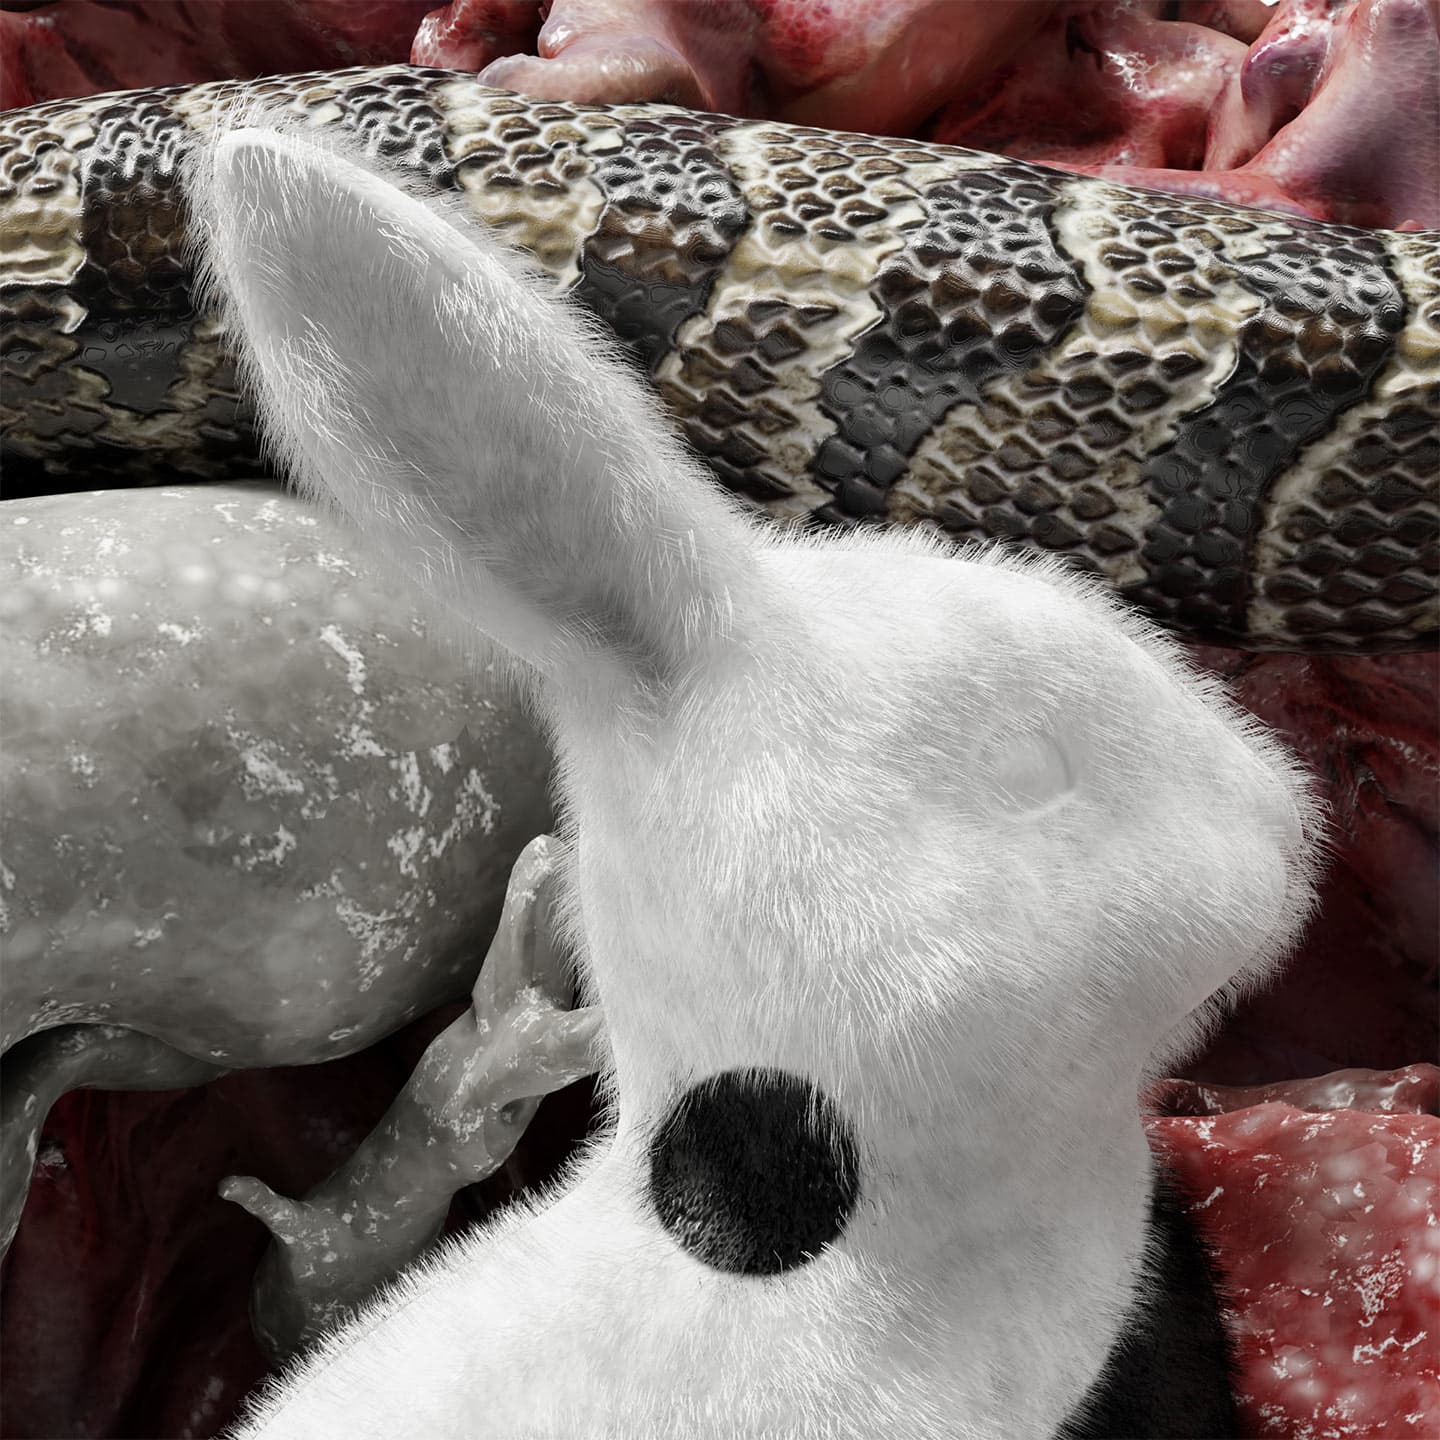 CGI close-up image of a snake tail next to a ying-yang themed rabbit head